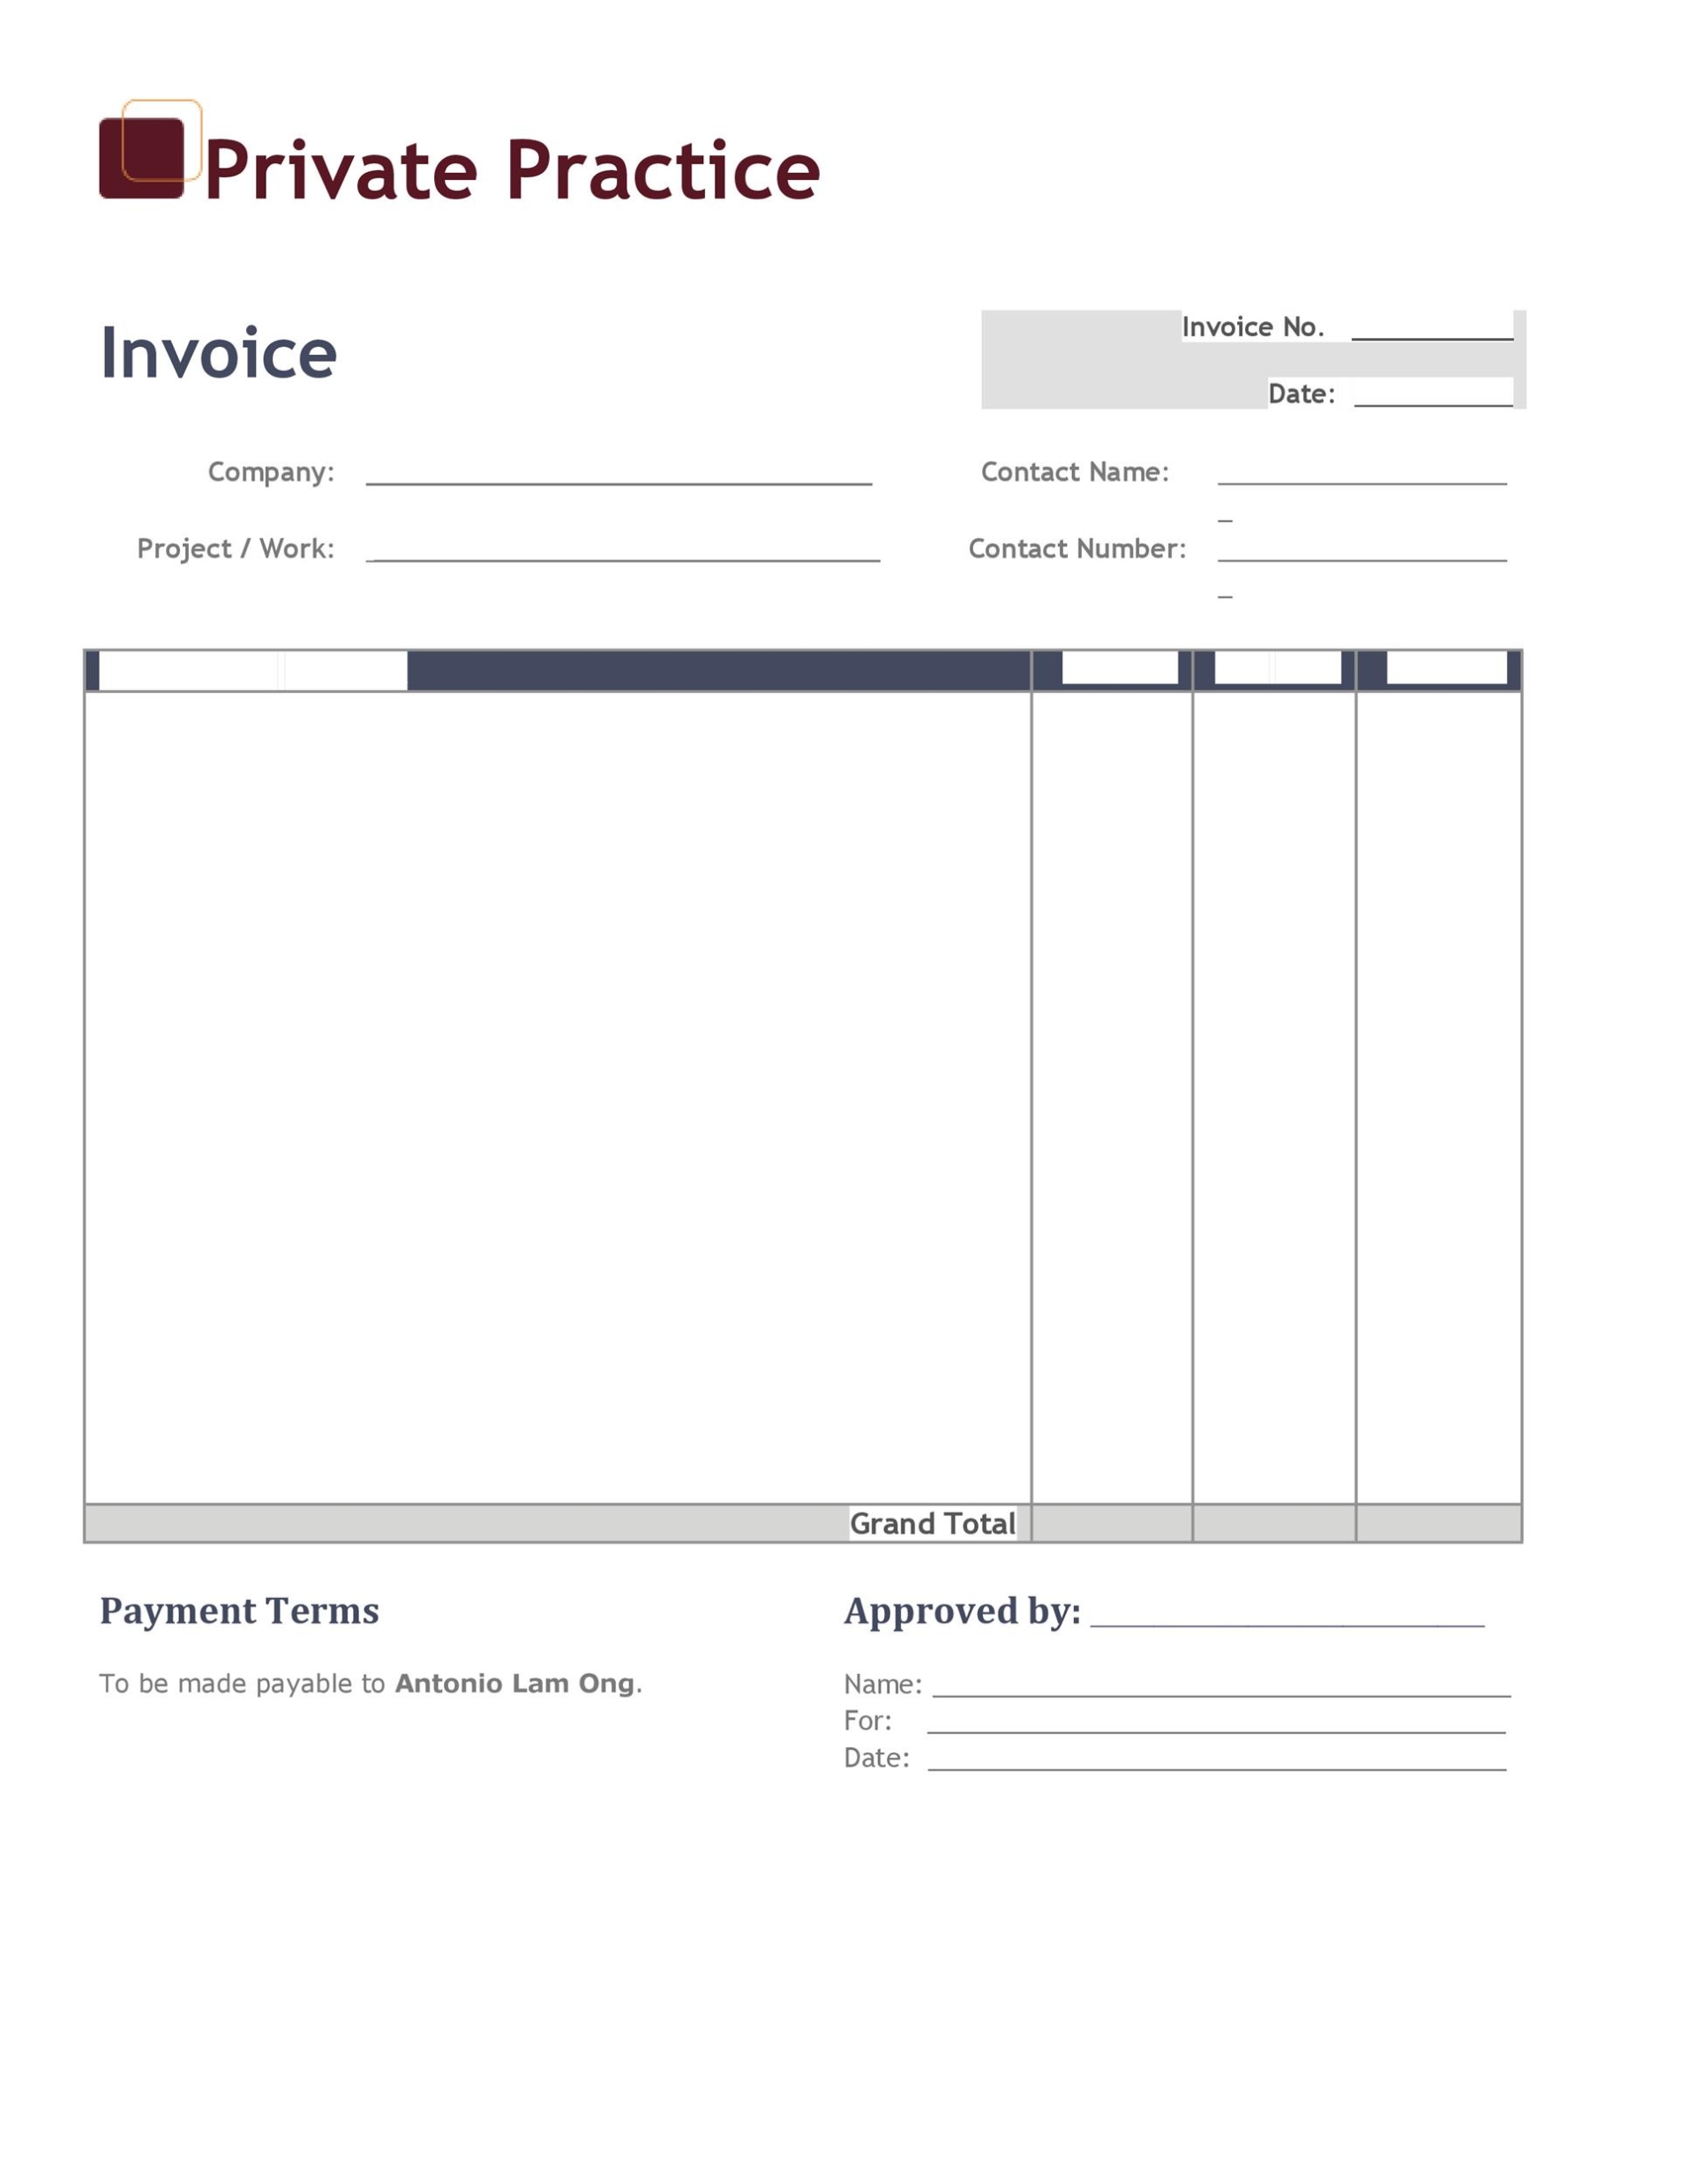 Free 24 Invoice Examples In Pdf Examples Blank Commercial - Reuniversity in Fillable Invoice Template Pdf